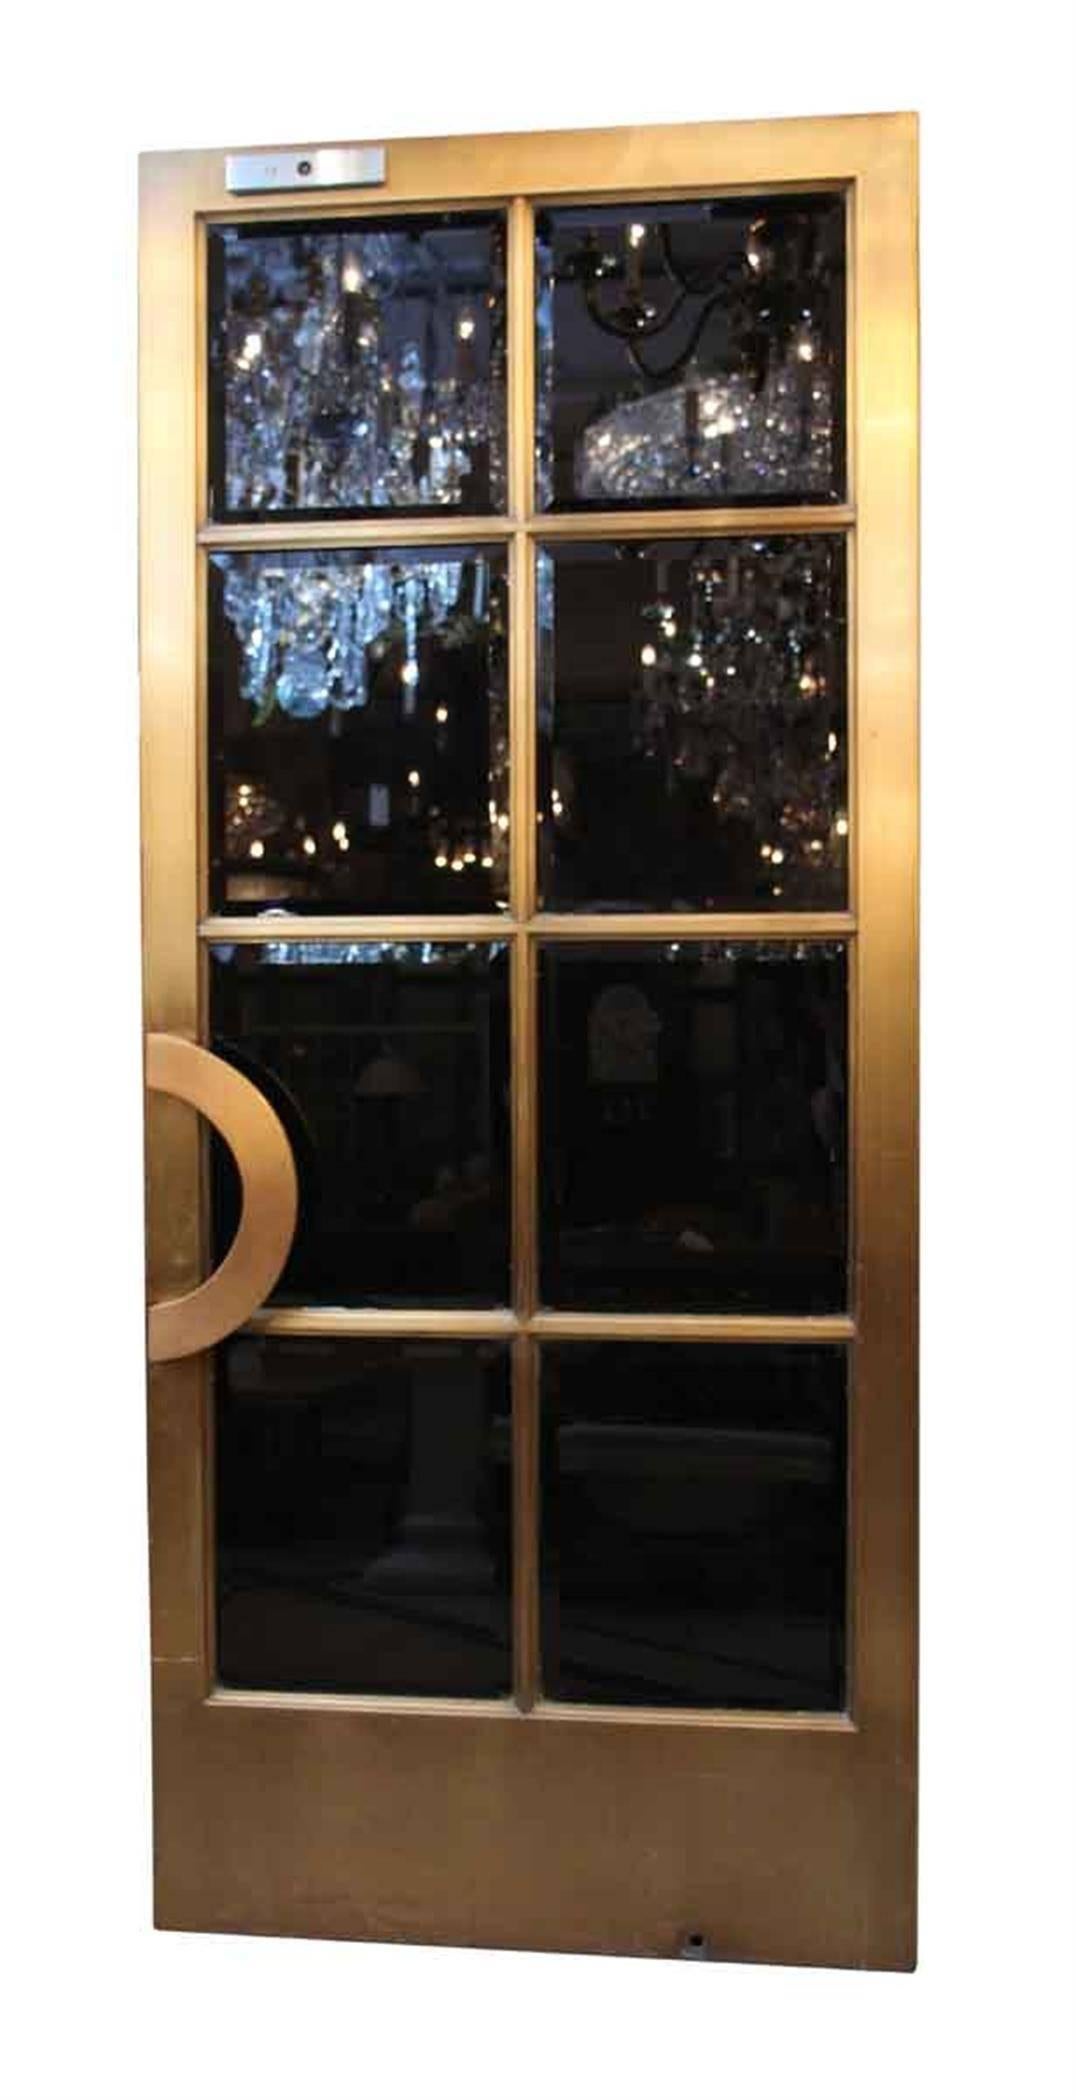 Pair of bronze Art Deco style doors with black painted beveled glass from the famous Crown building at 57th and 5th Avenue in Manhattan, circa 1921. They are from the same architects who did Grand Central. Warren and Wetmore of the Helmsley. Priced